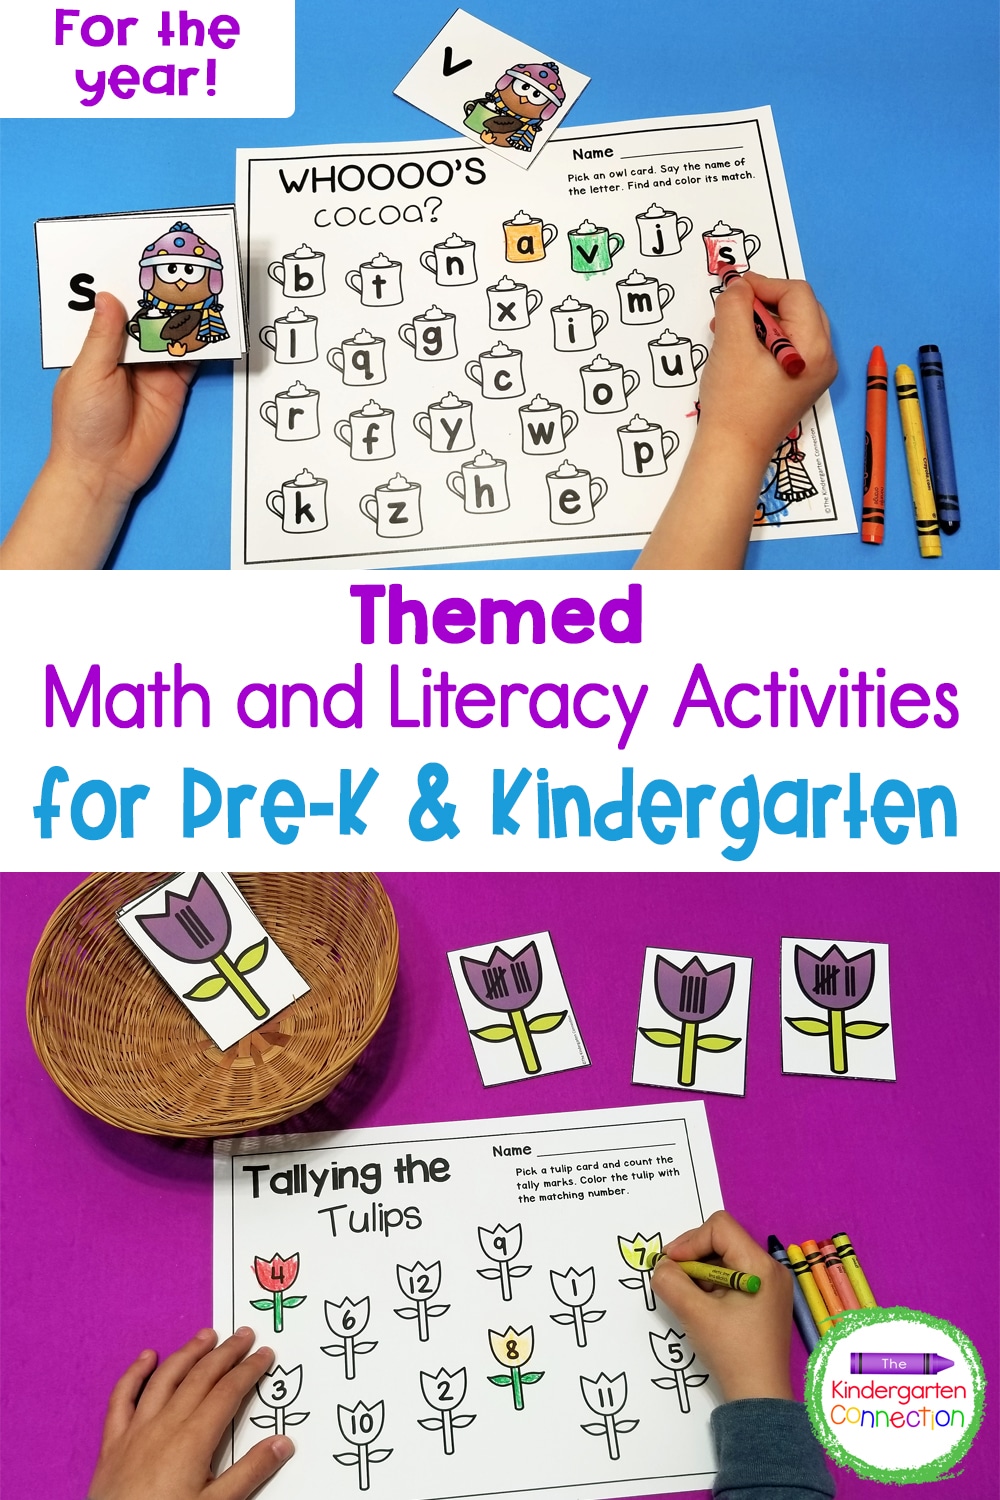 This bundle of Themed Math and Literacy Activities for Pre-K & Kindergarten covers a variety of skills in an engaging way that your students will love!